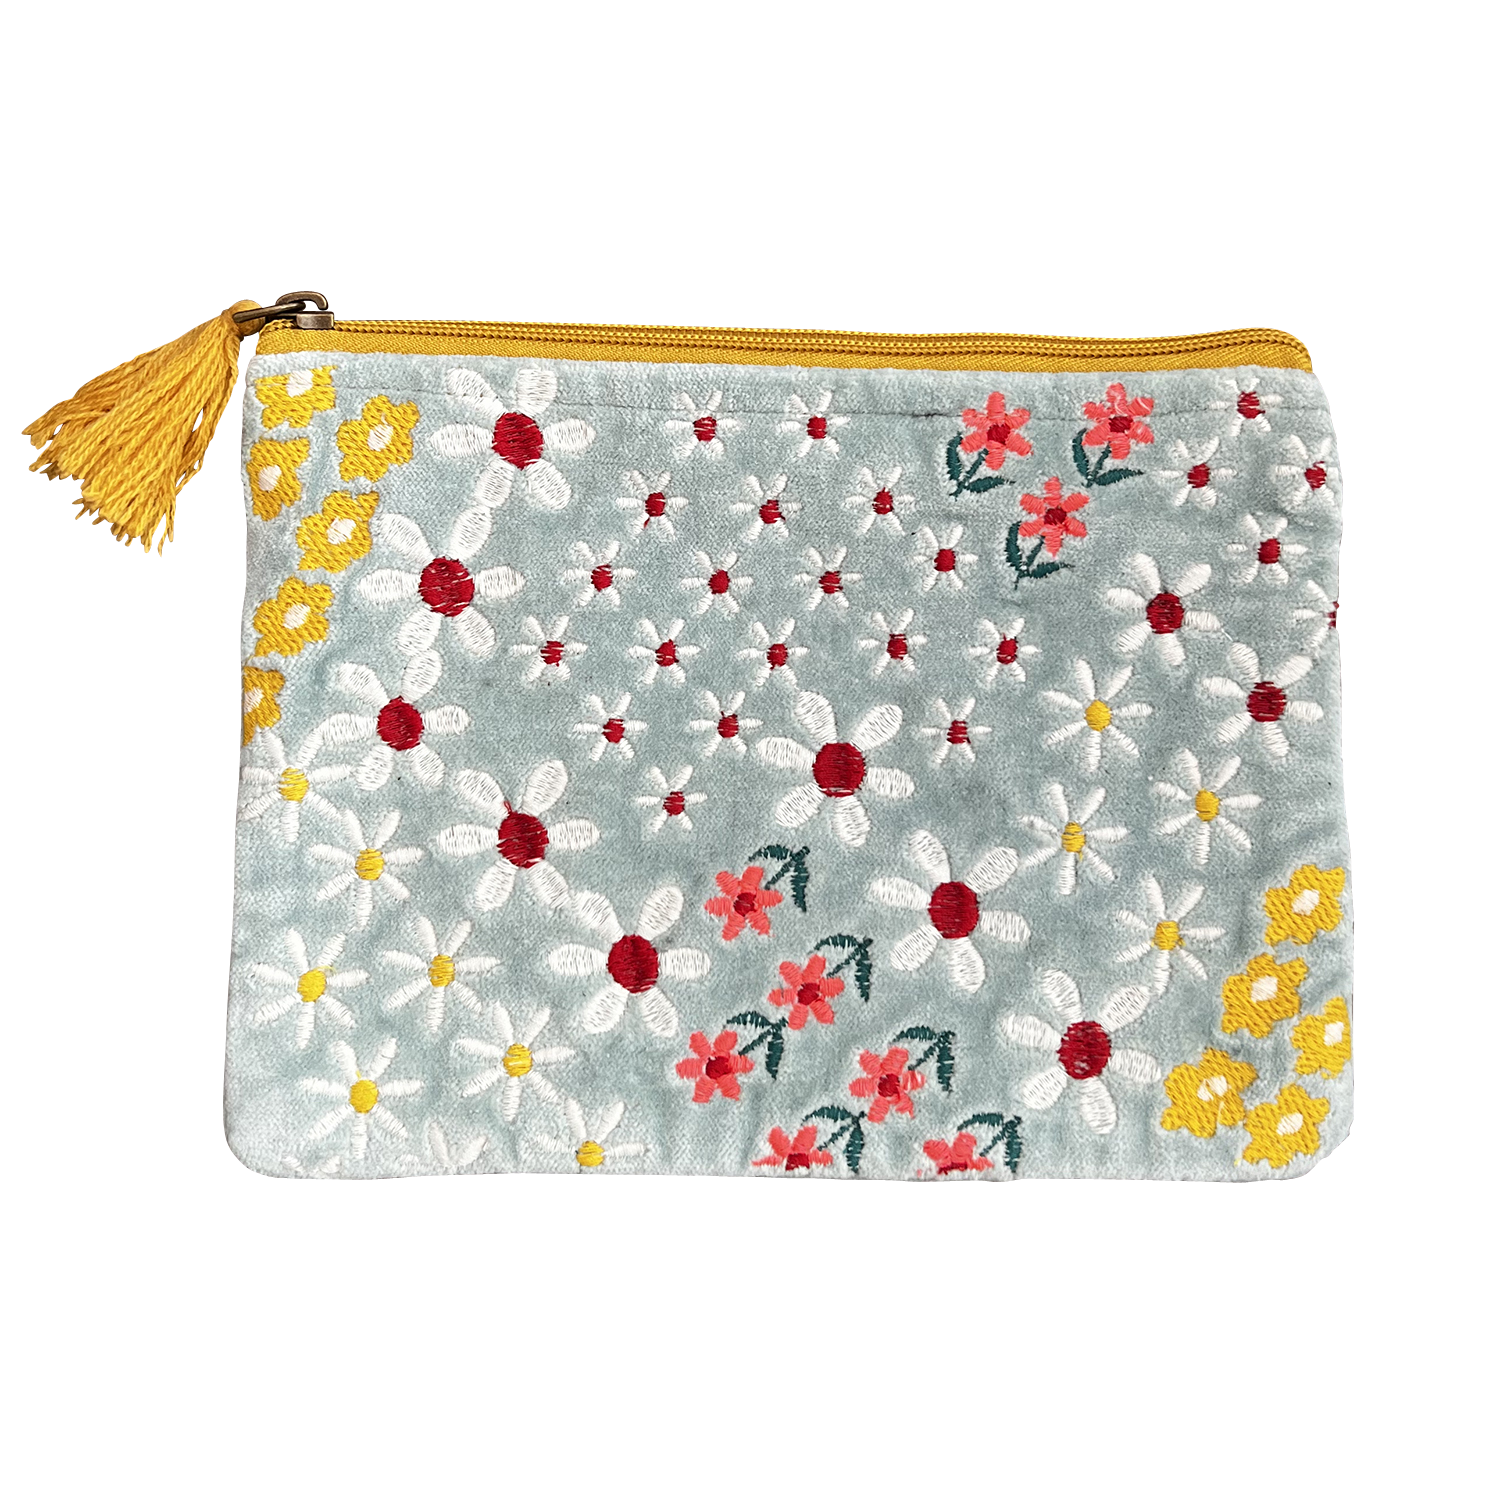 Embroidered Daisy Bouquet Coin Purse